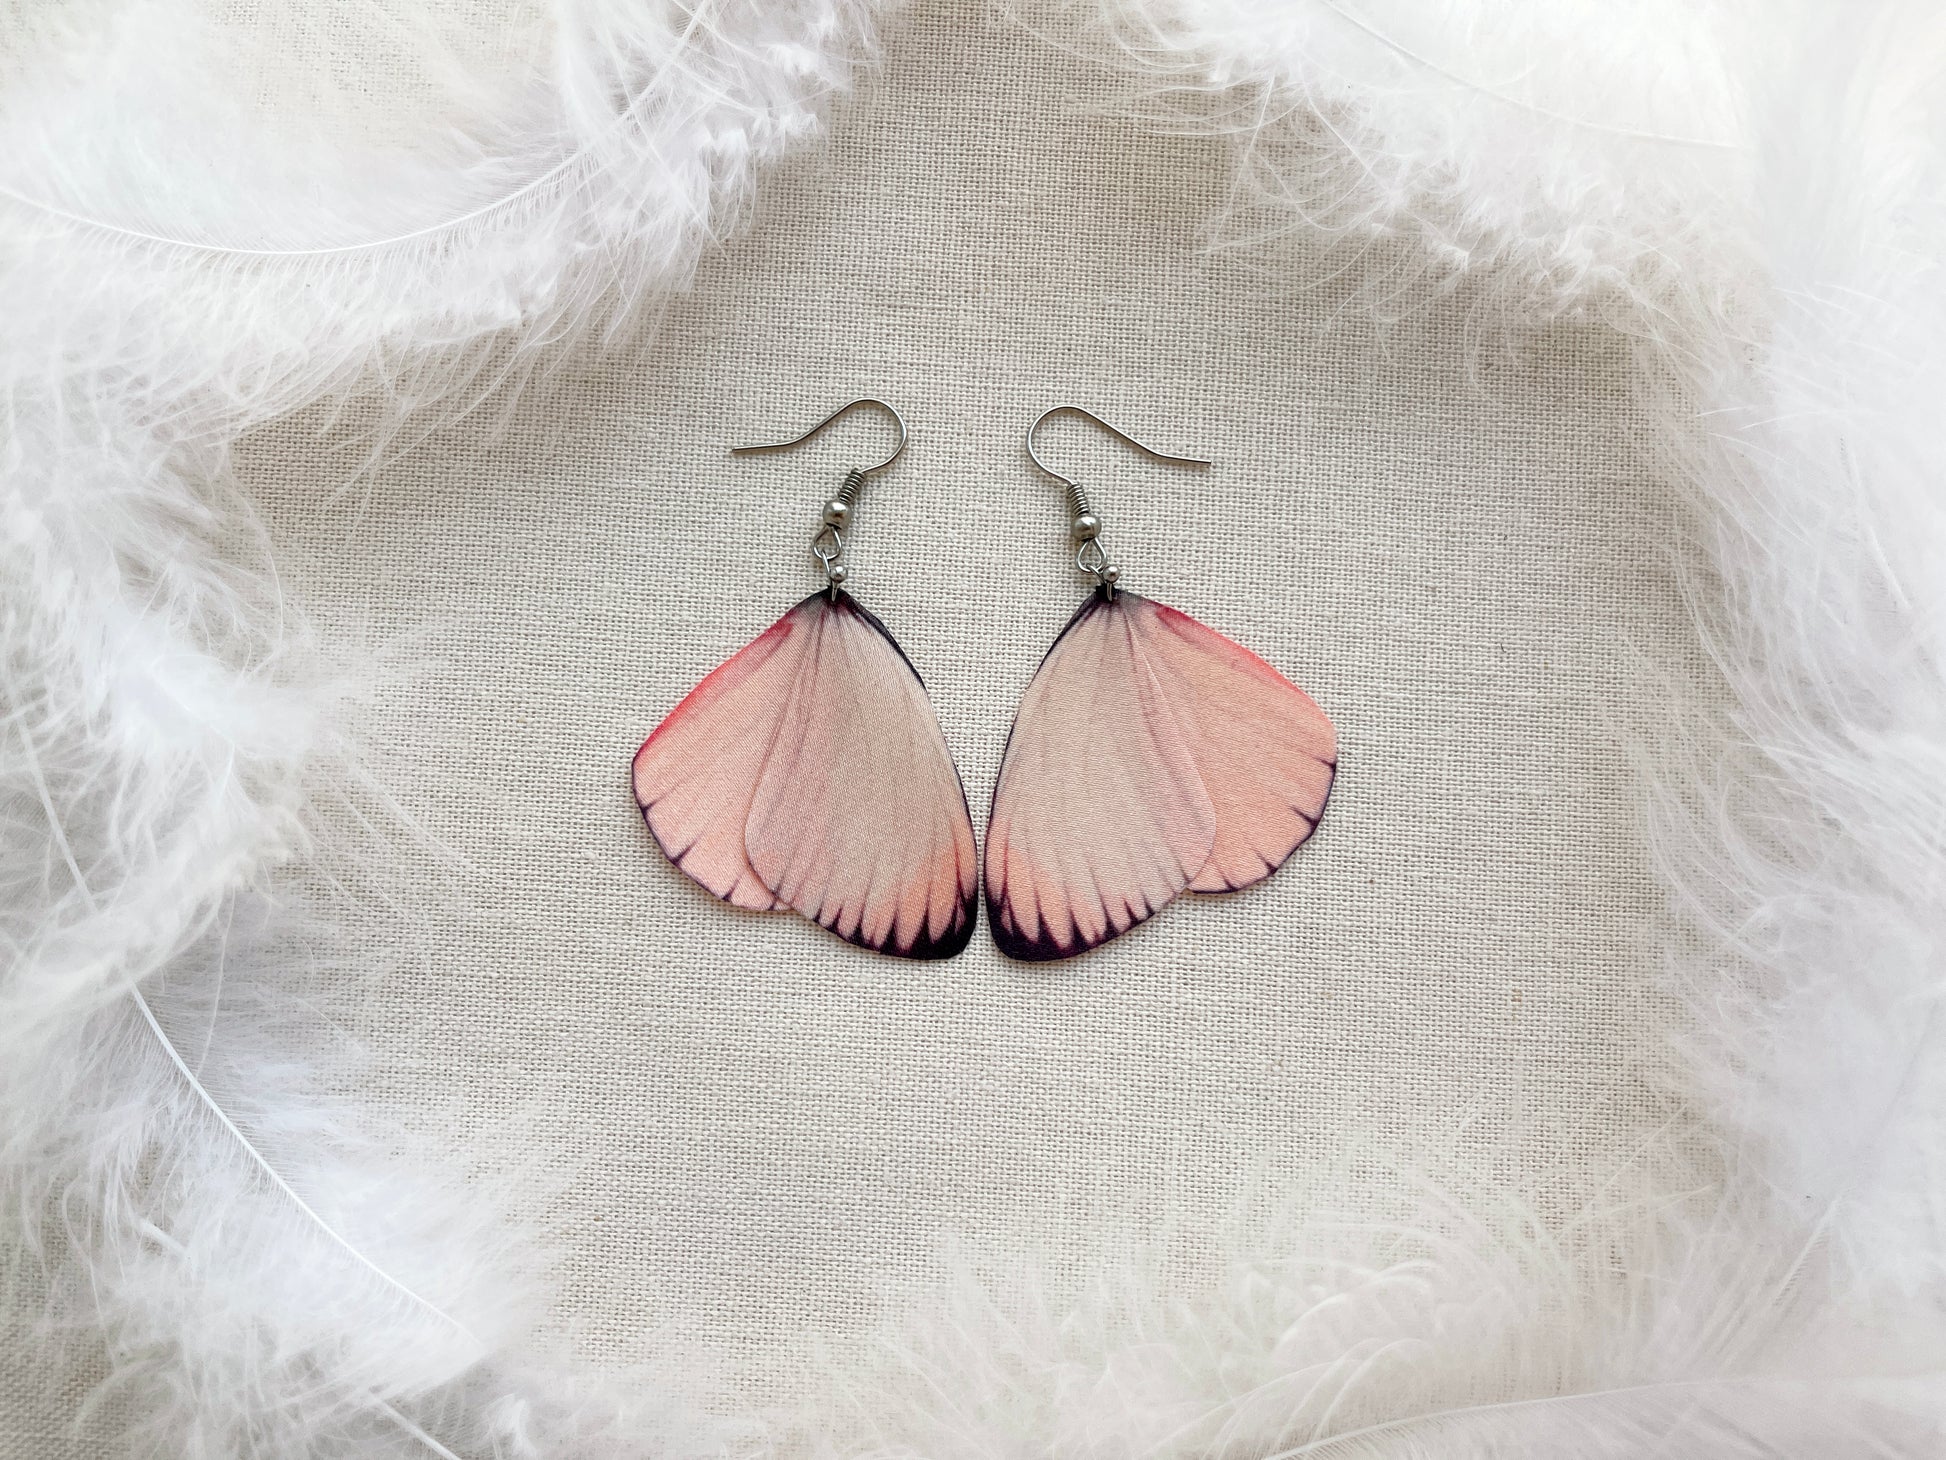 Cute Pink Earrings with Faux Butterfly Wings - close-up